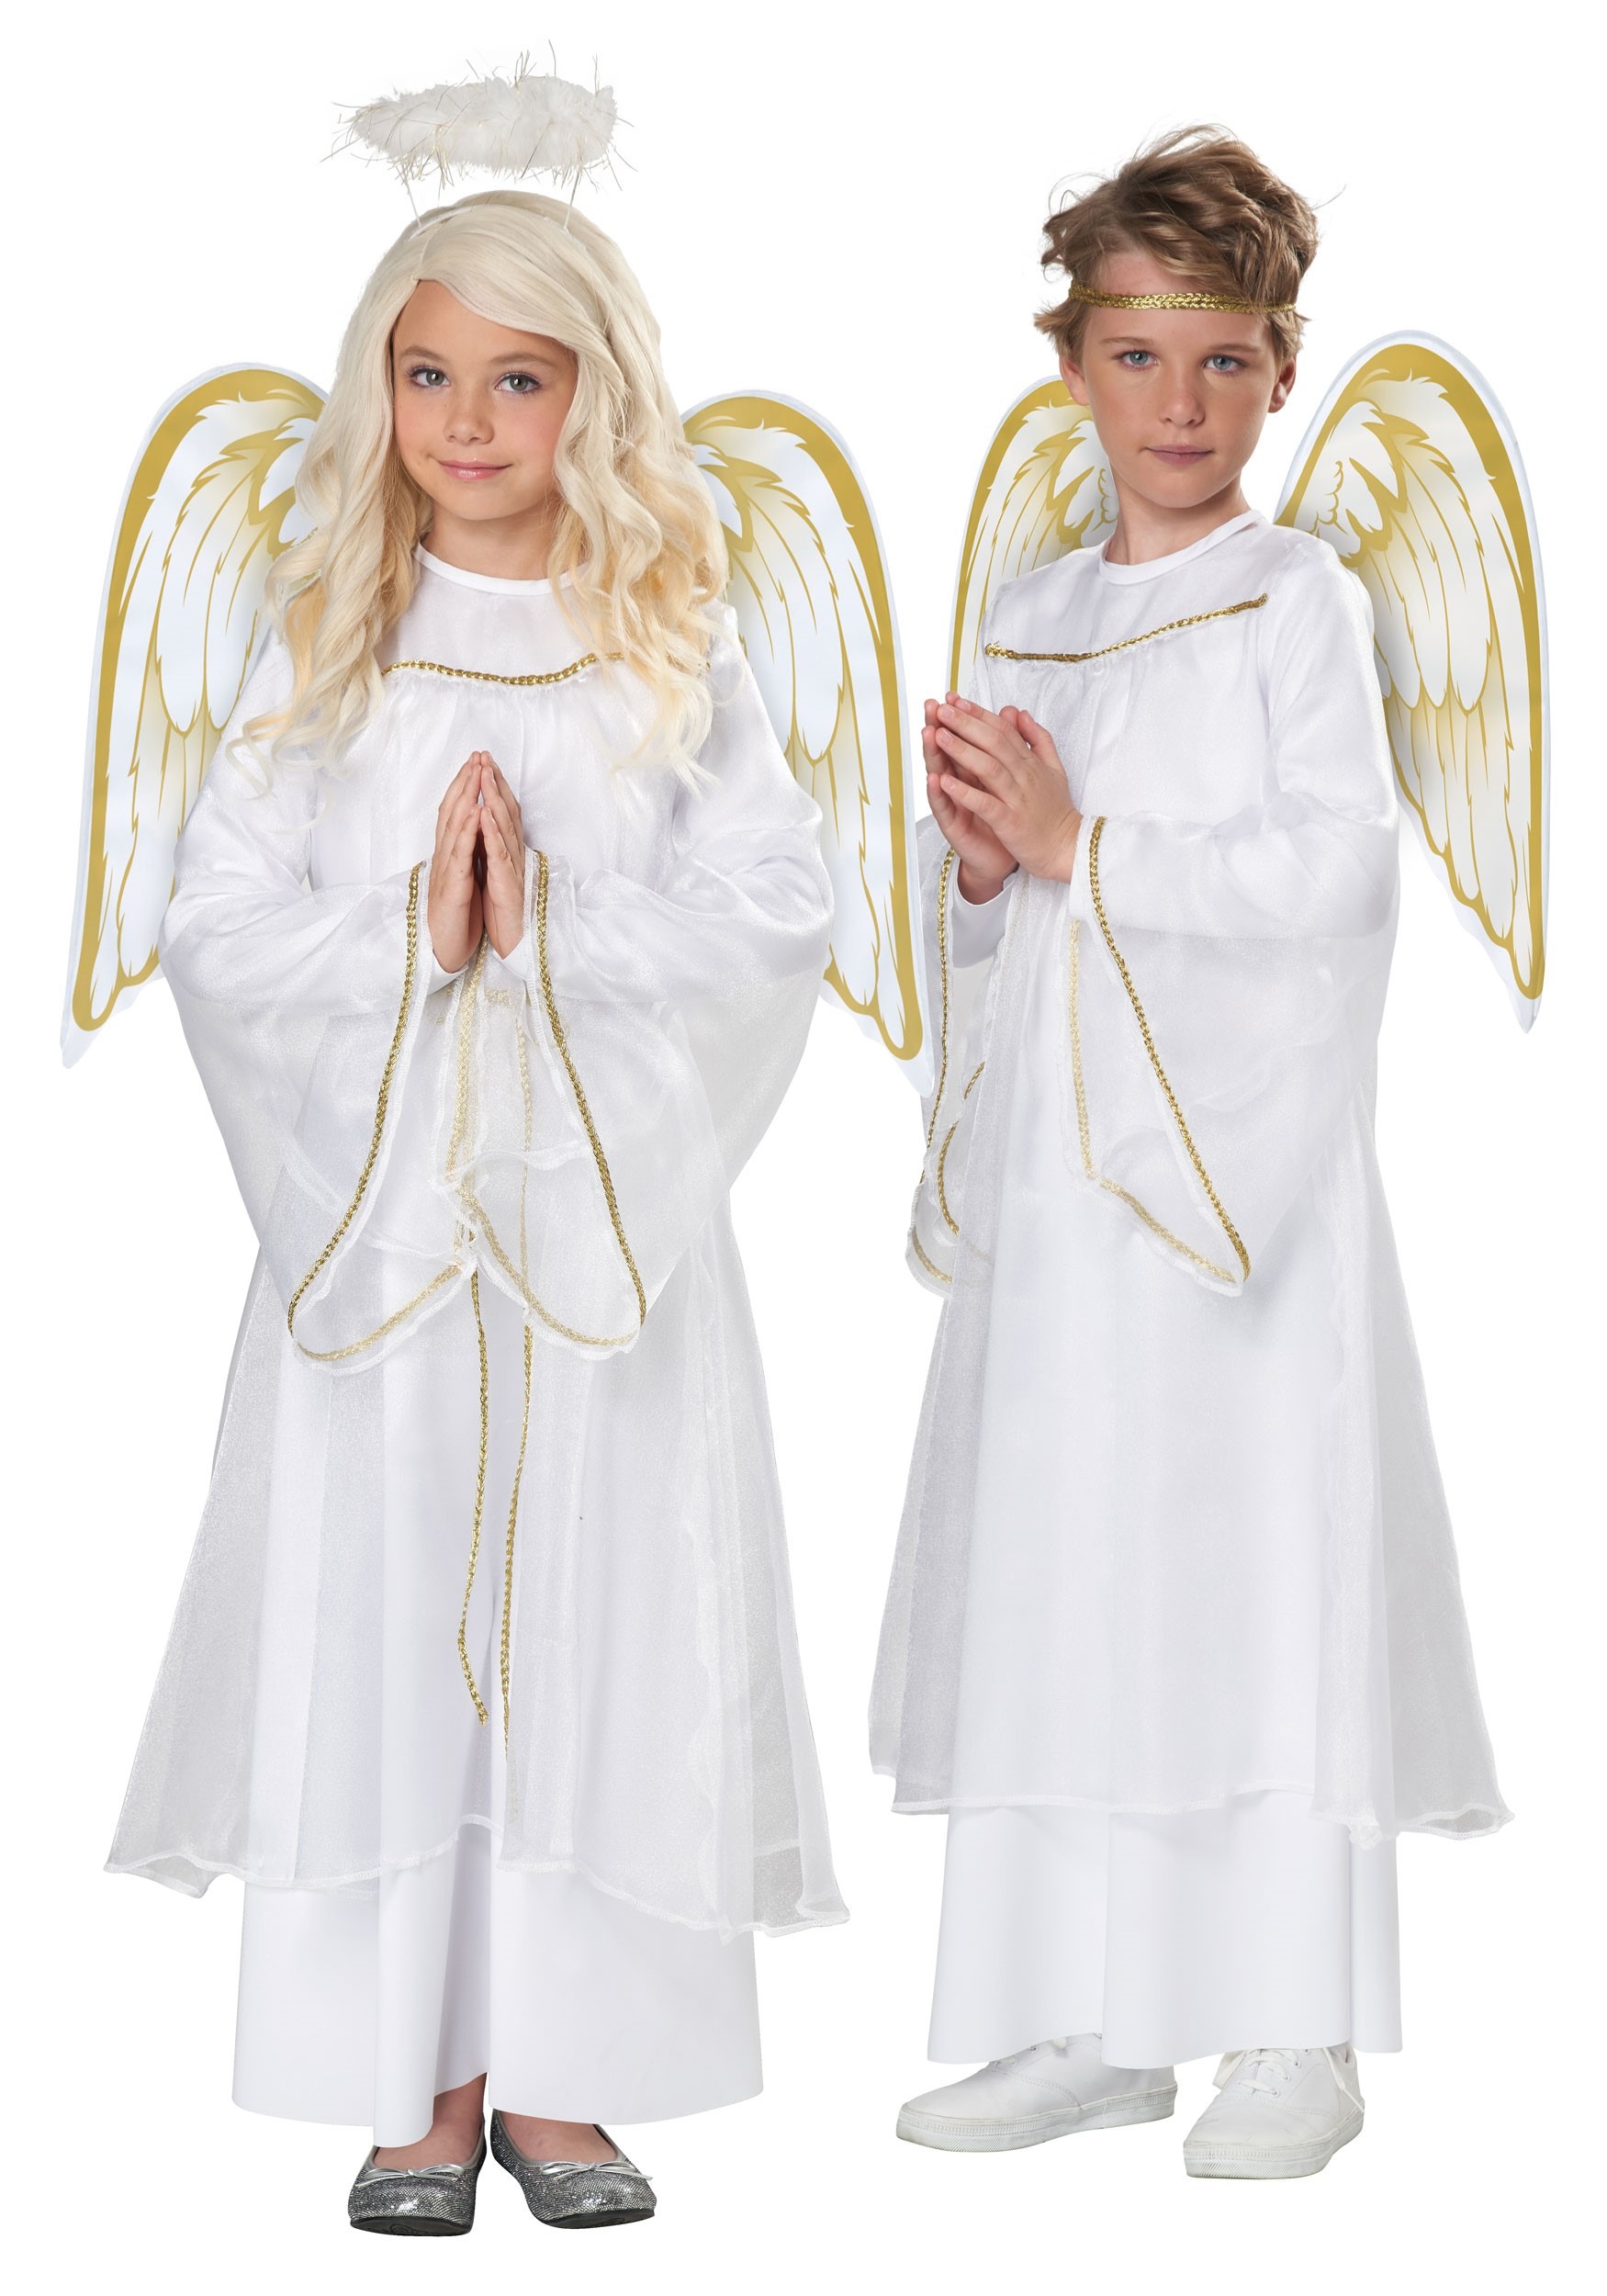 Photos - Fancy Dress California Costume Collection Holiday Angel Costume for Kids Yellow/Wh 